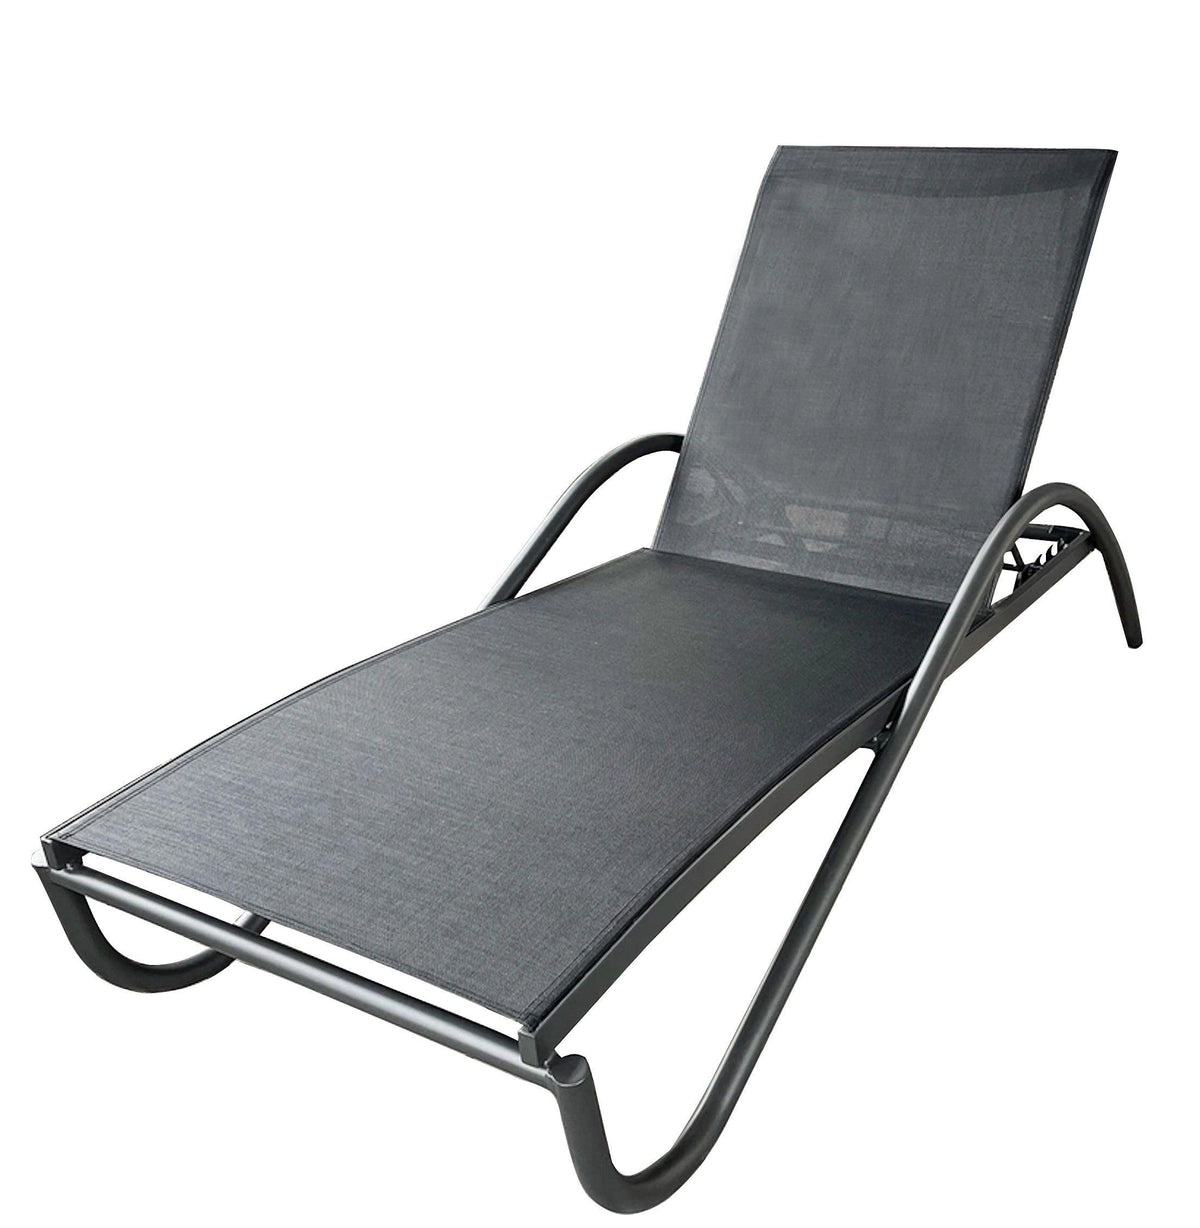 Named after the iconic street in Toronto, the Bloor Chaise Sling Lounge, is eye catching and stackable for storage ease. With a grey aluminum frame and supporting sling, this chair lasts year over year. 